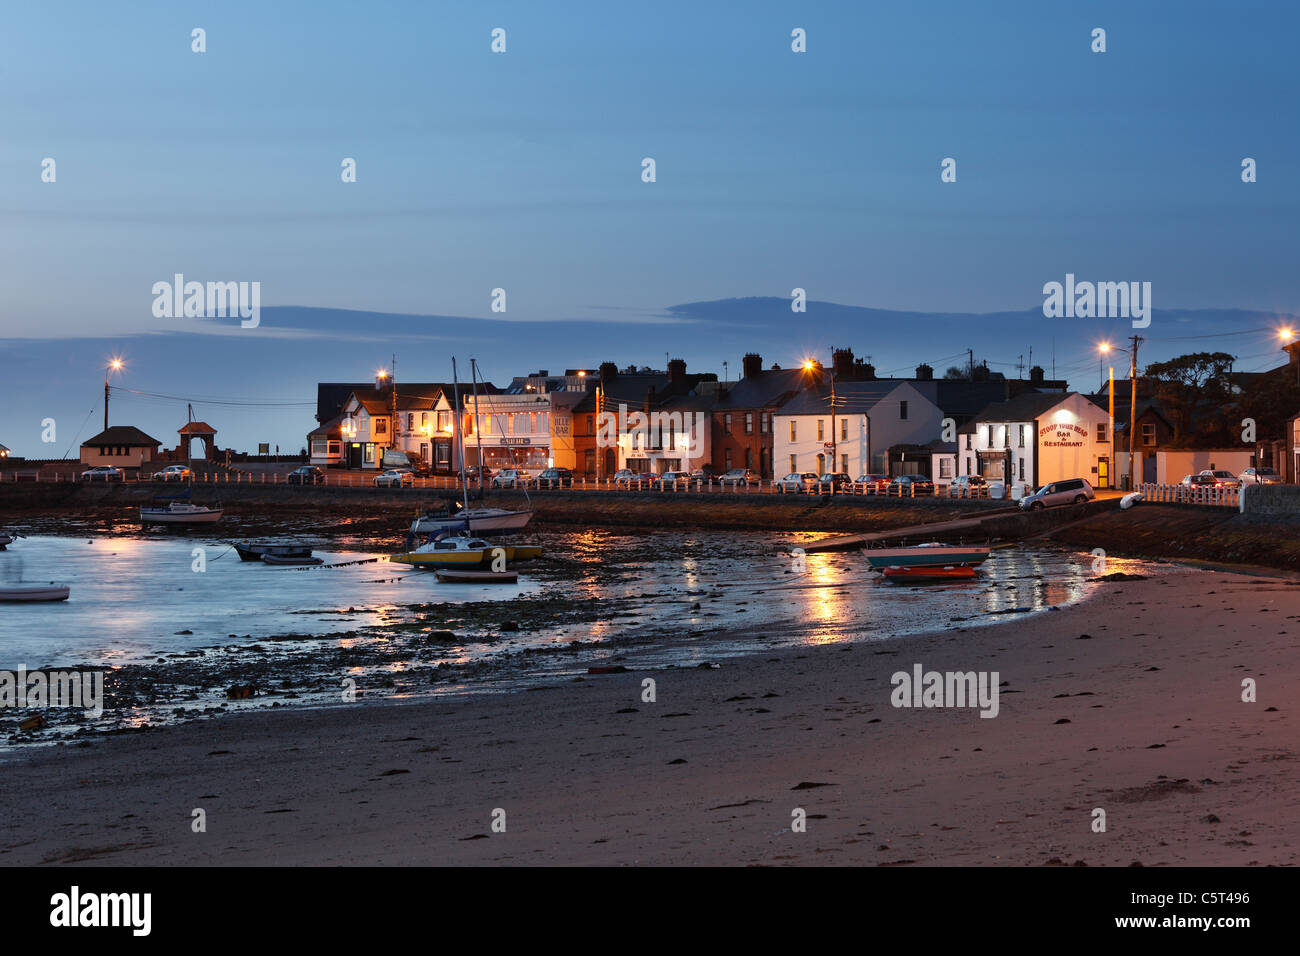 Republic of Ireland, County Fingal, Skerries, View of 